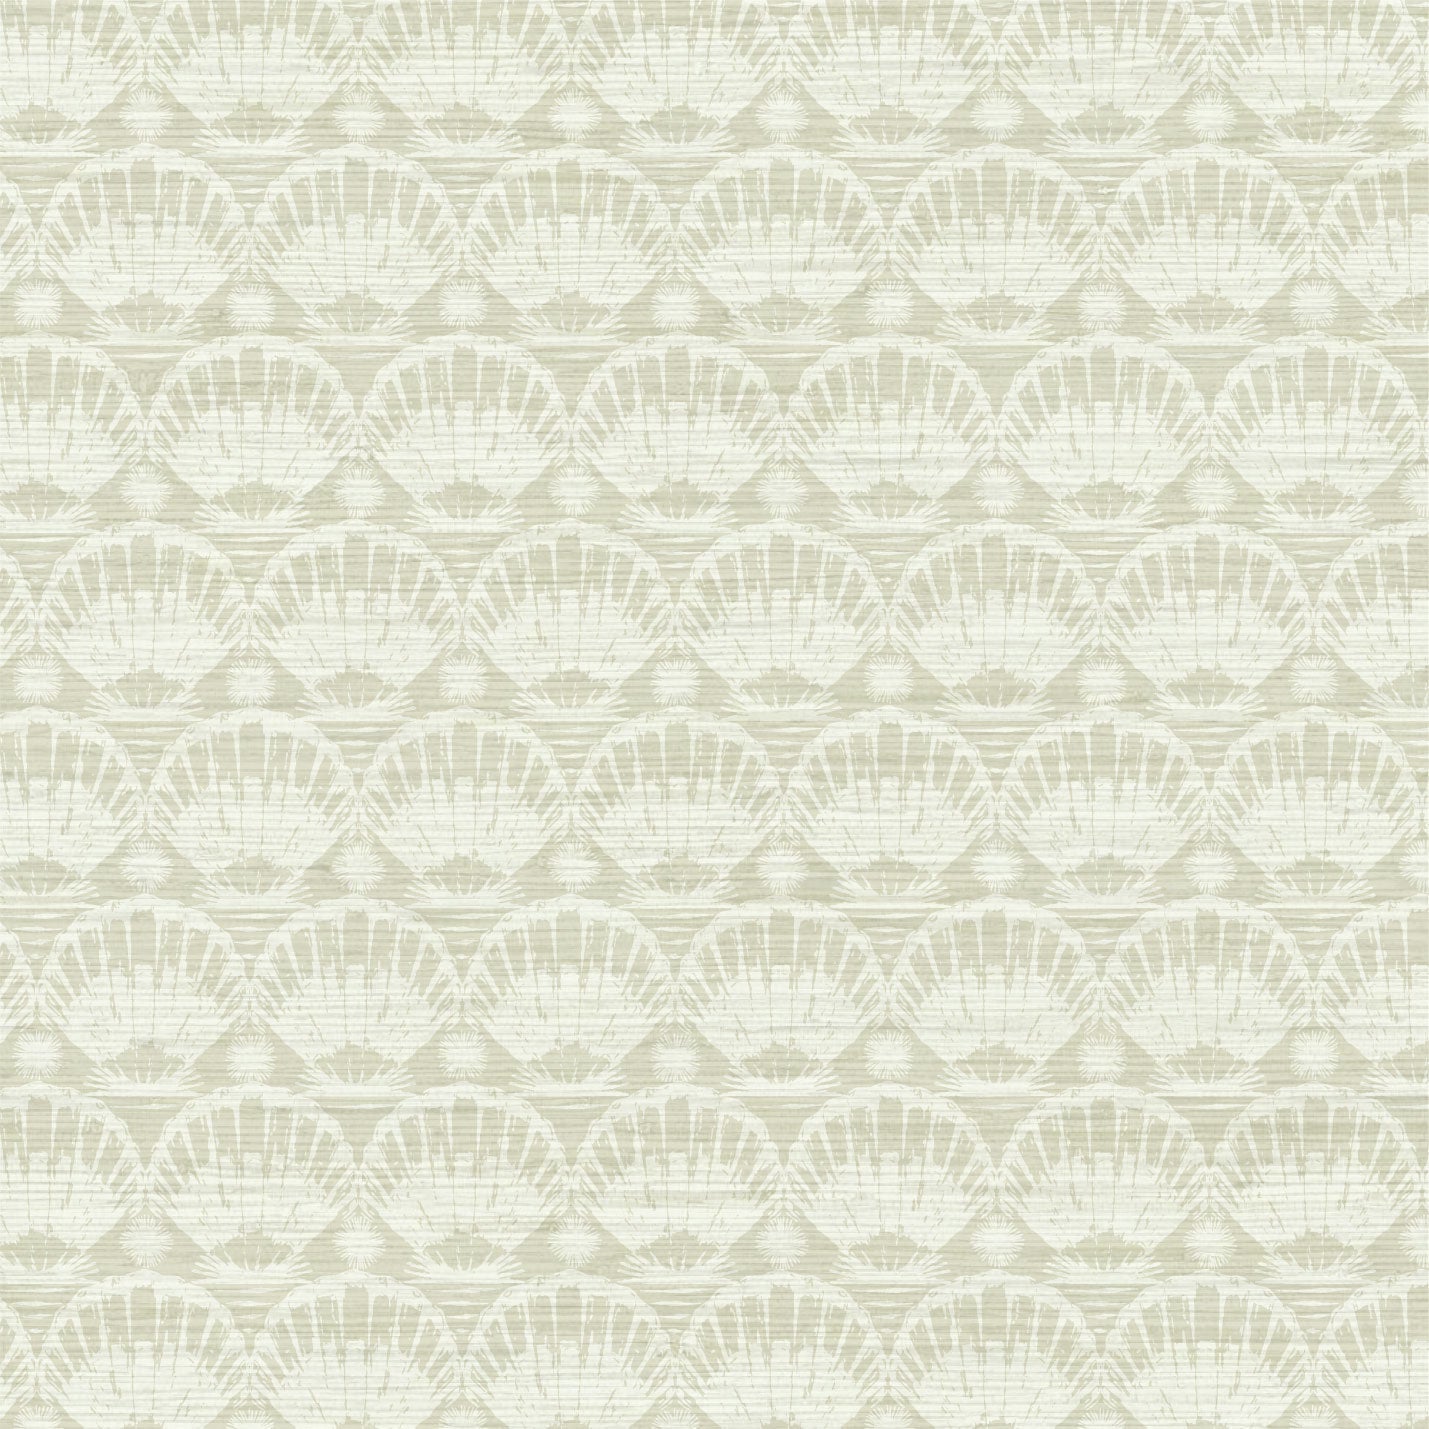 printed grasscloth wallpaper seashell horizontal stripe Natural Textured Eco-Friendly Non-toxic High-quality Sustainable practices Sustainability Interior Design Wall covering custom tailor-made retro chic tropical bespoke nature Seaside Coastal Seashore Waterfront Vacation home styling Retreat Relaxed beach vibes Beach cottage Shoreline Oceanfront Nautical neutral sand cream off-white white sand